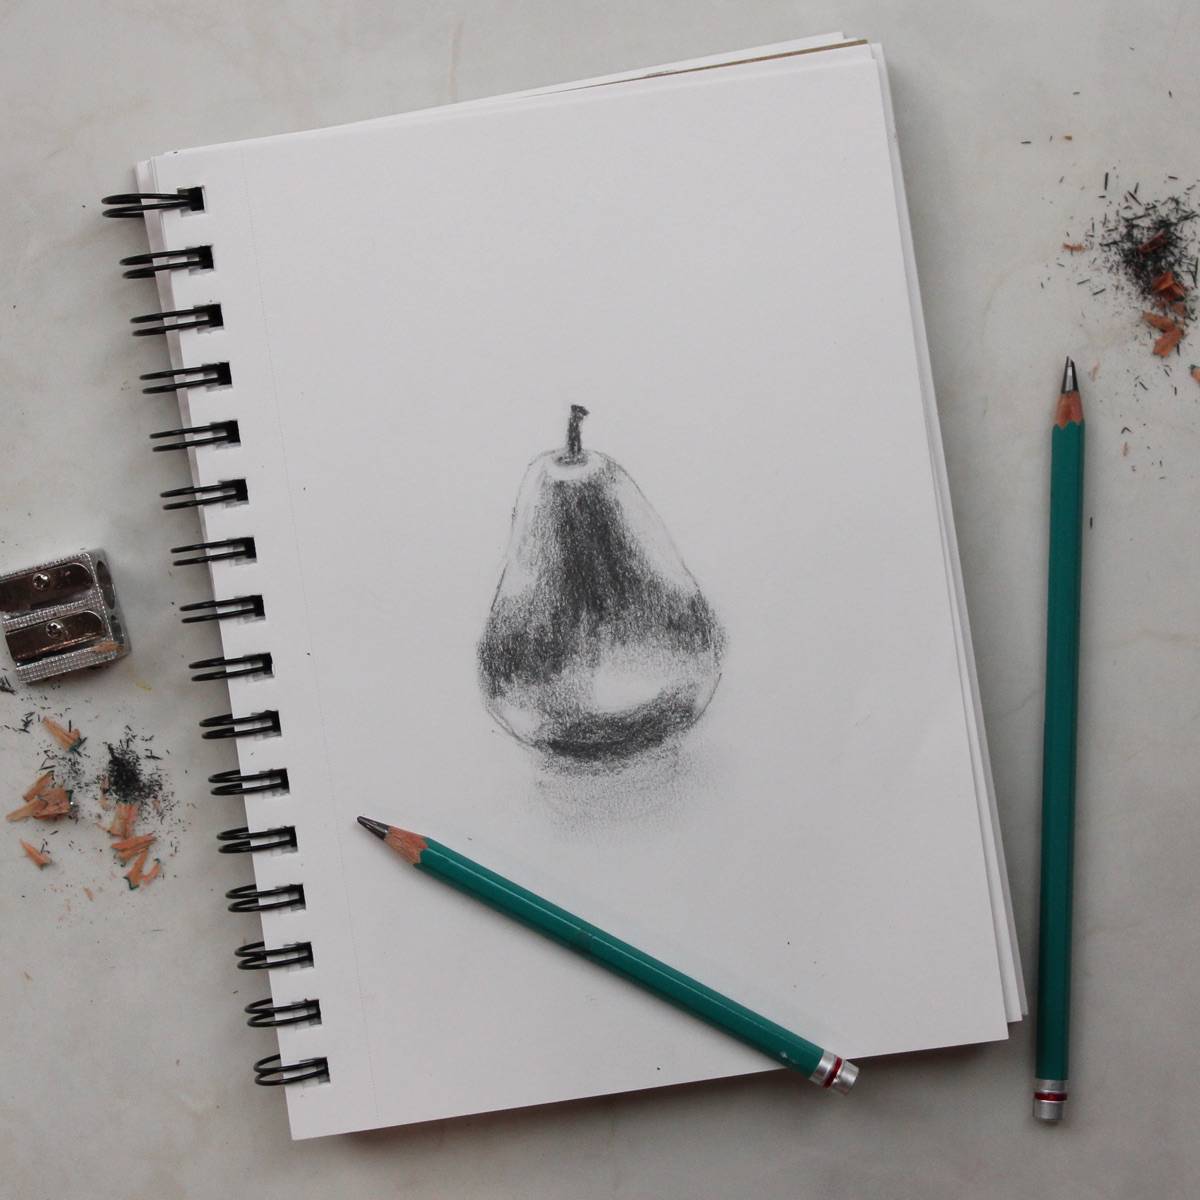 Pencil drawing of a pear on a spiral-bound sketchbook with drawing pencils, pencil sharpener, and sharpening dust. 